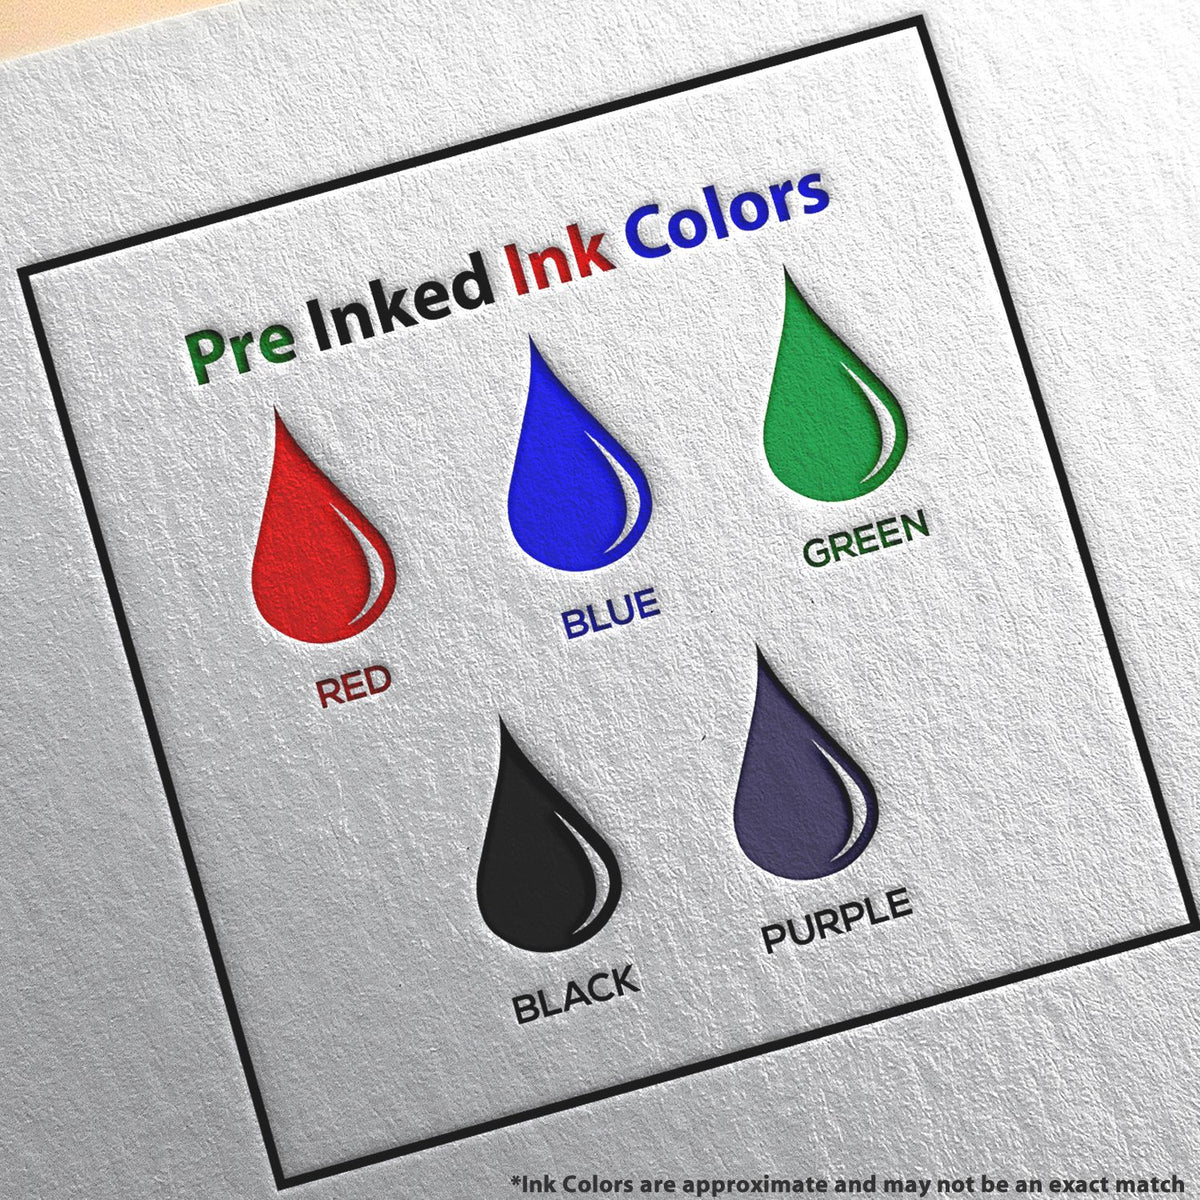 A picture showing the different ink colors or hues available for the Slim Pre-Inked Rectangular Notary Stamp for Florida product.